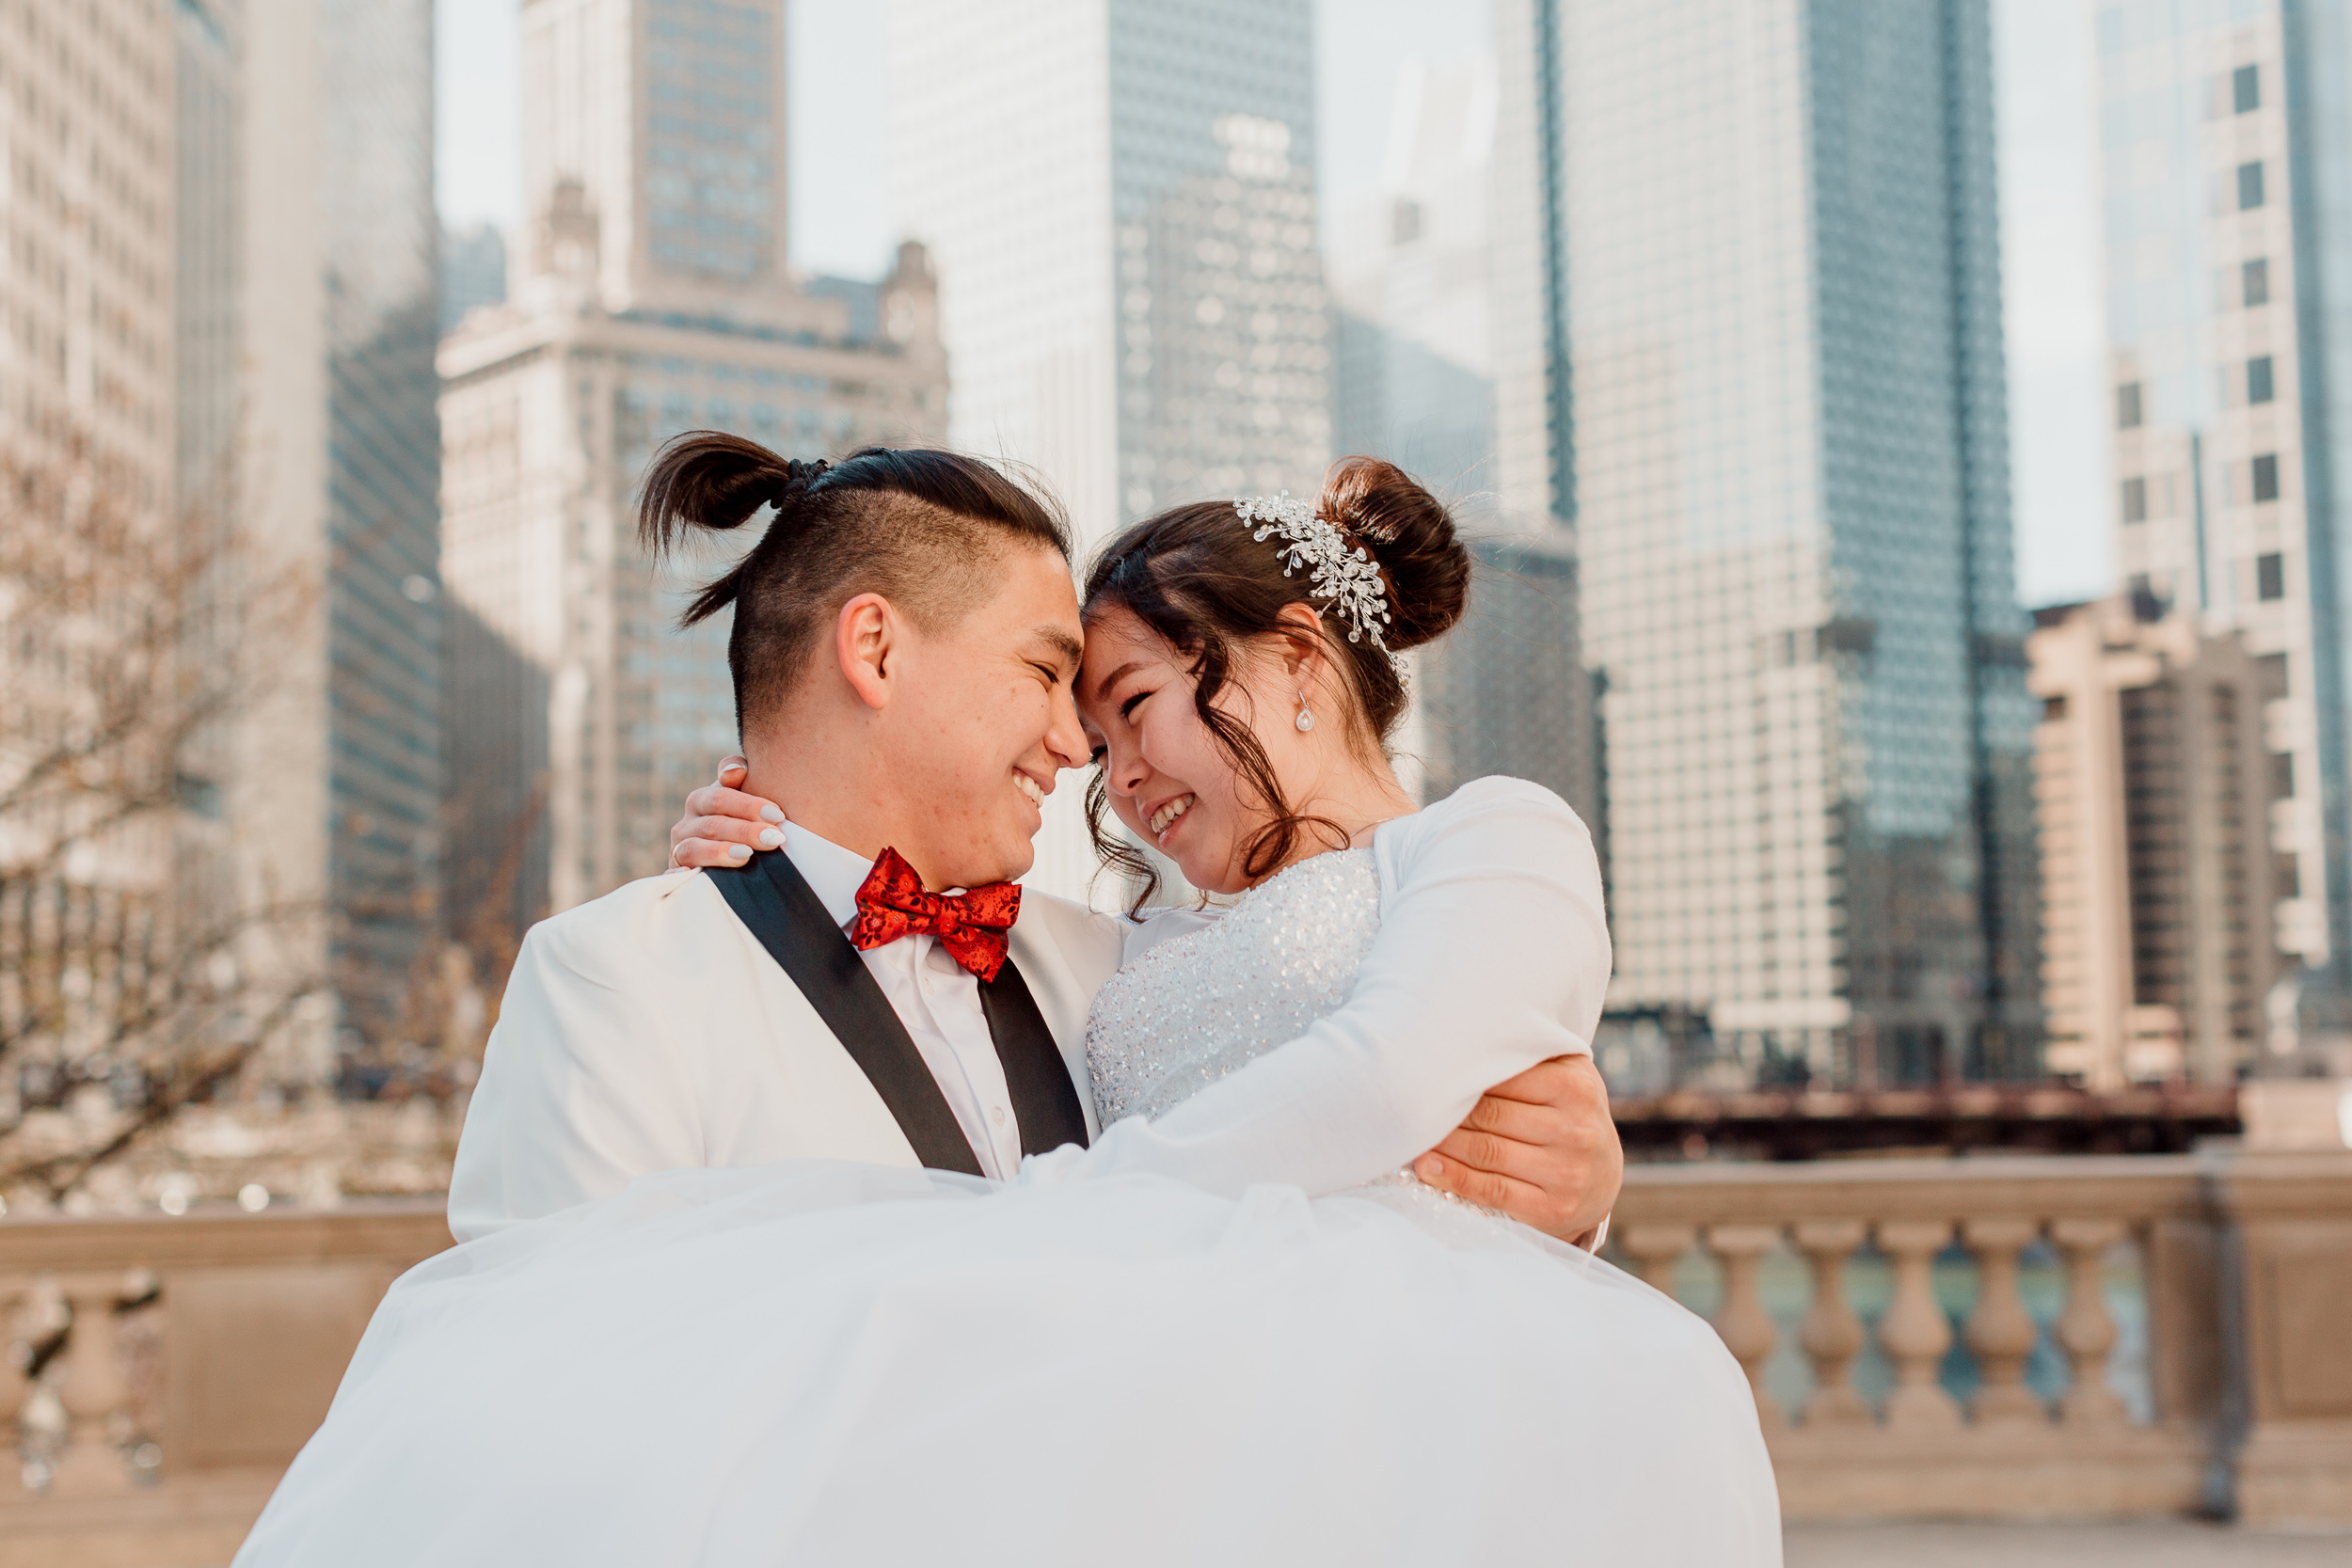 Romantic Wedding Portraits Chicago Skyline | Chicago Locations for Photos | Downtown Chicago Wedding Photographer | Trump Tower Wedding | Trump Tower Elopement | Chicago Elopement | Small Chicago Wedding | Courthouse Wedding Chicago | Chicago Wedding Photographer | Chicago Elopement Photographer | Small Wedding Photographer Chicago